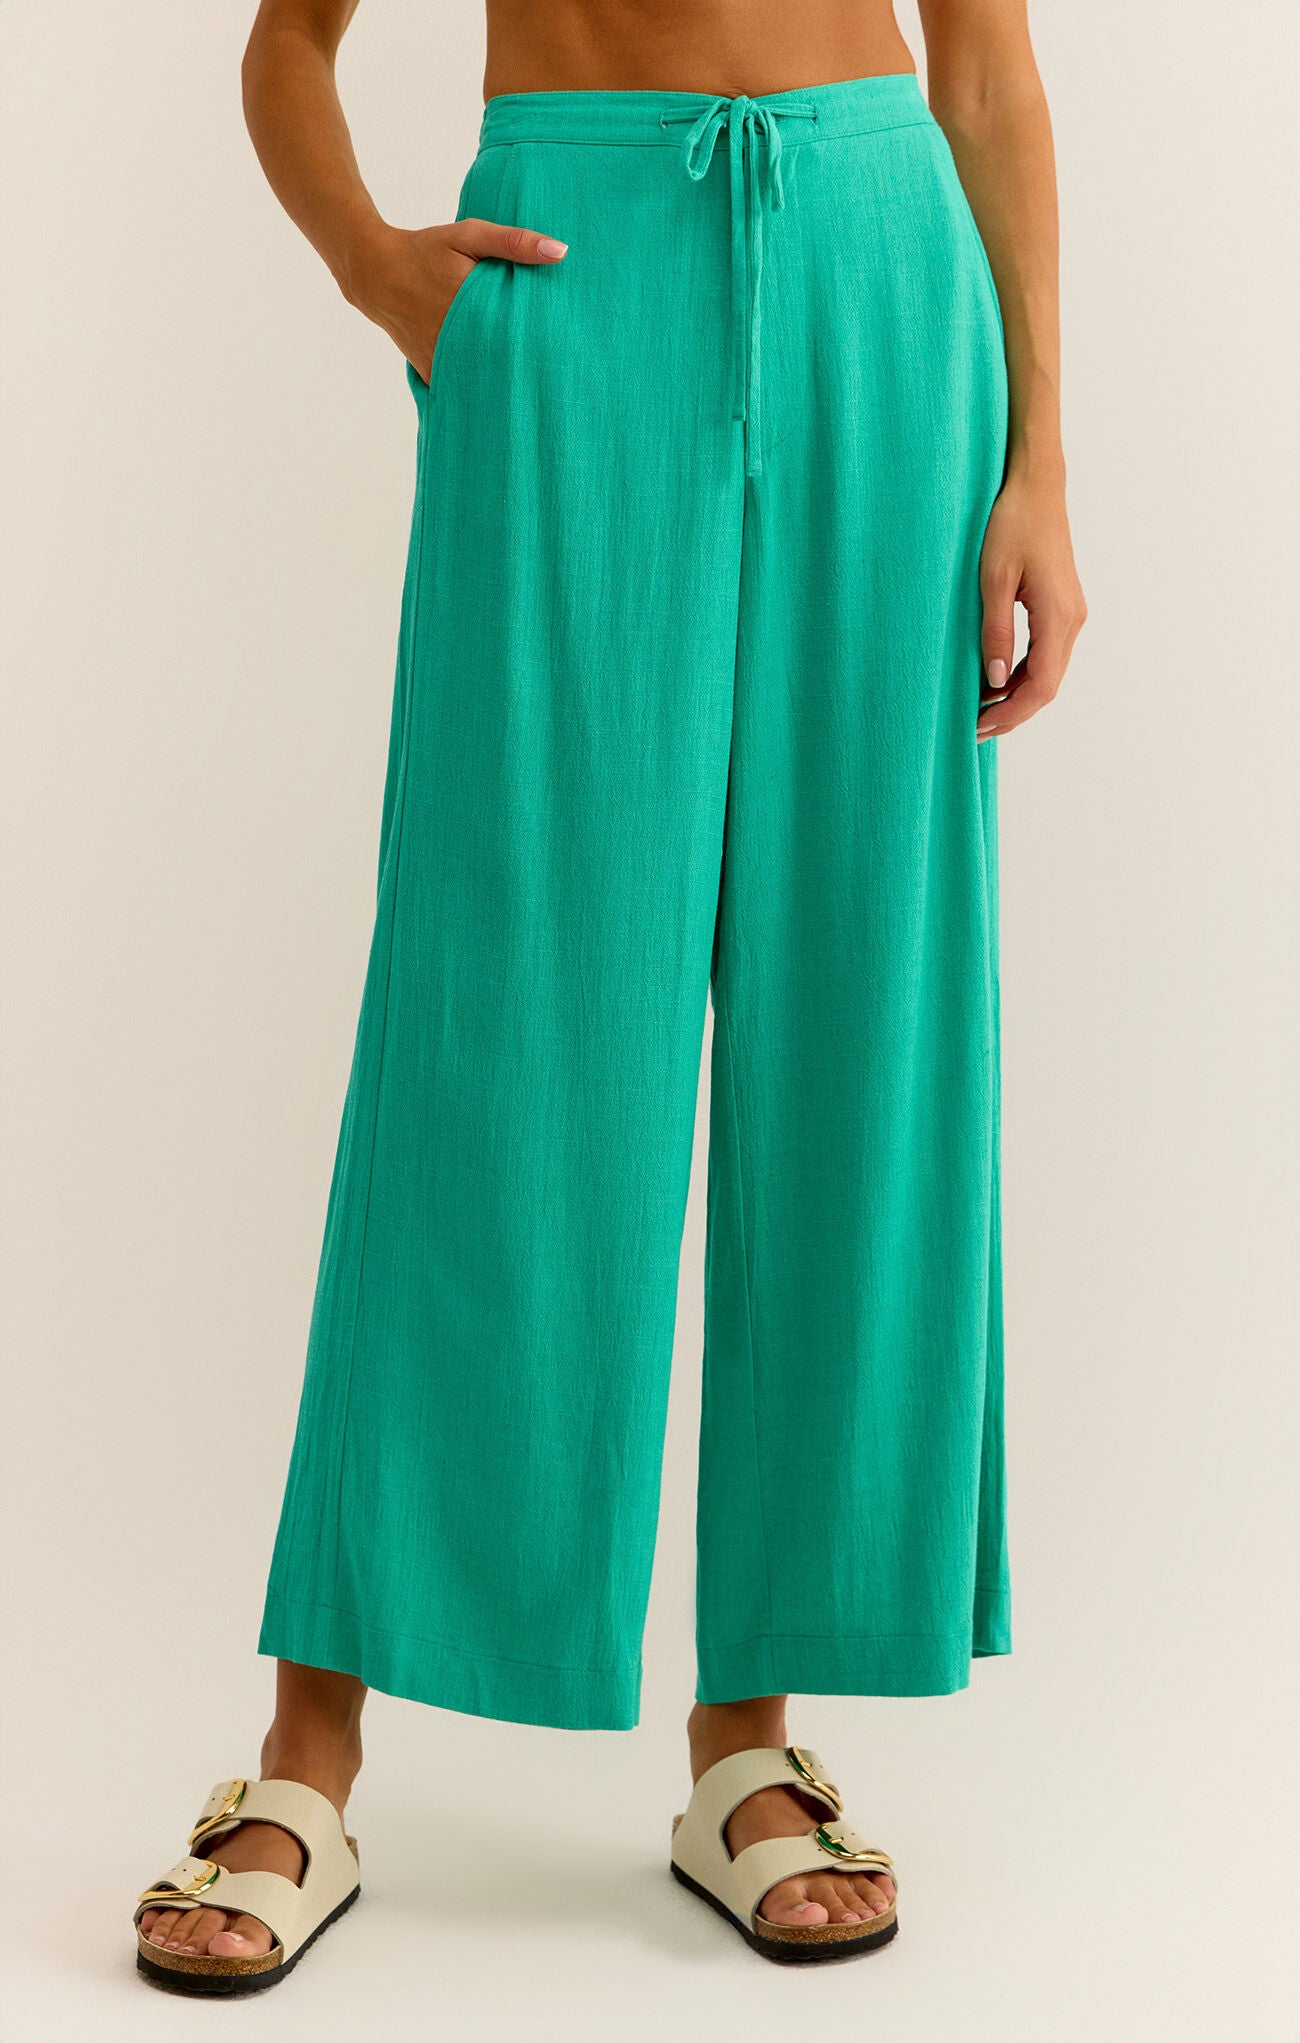 Z SUPPLY CORTEZ CROPPED PANT IN BERMUDA GREEN